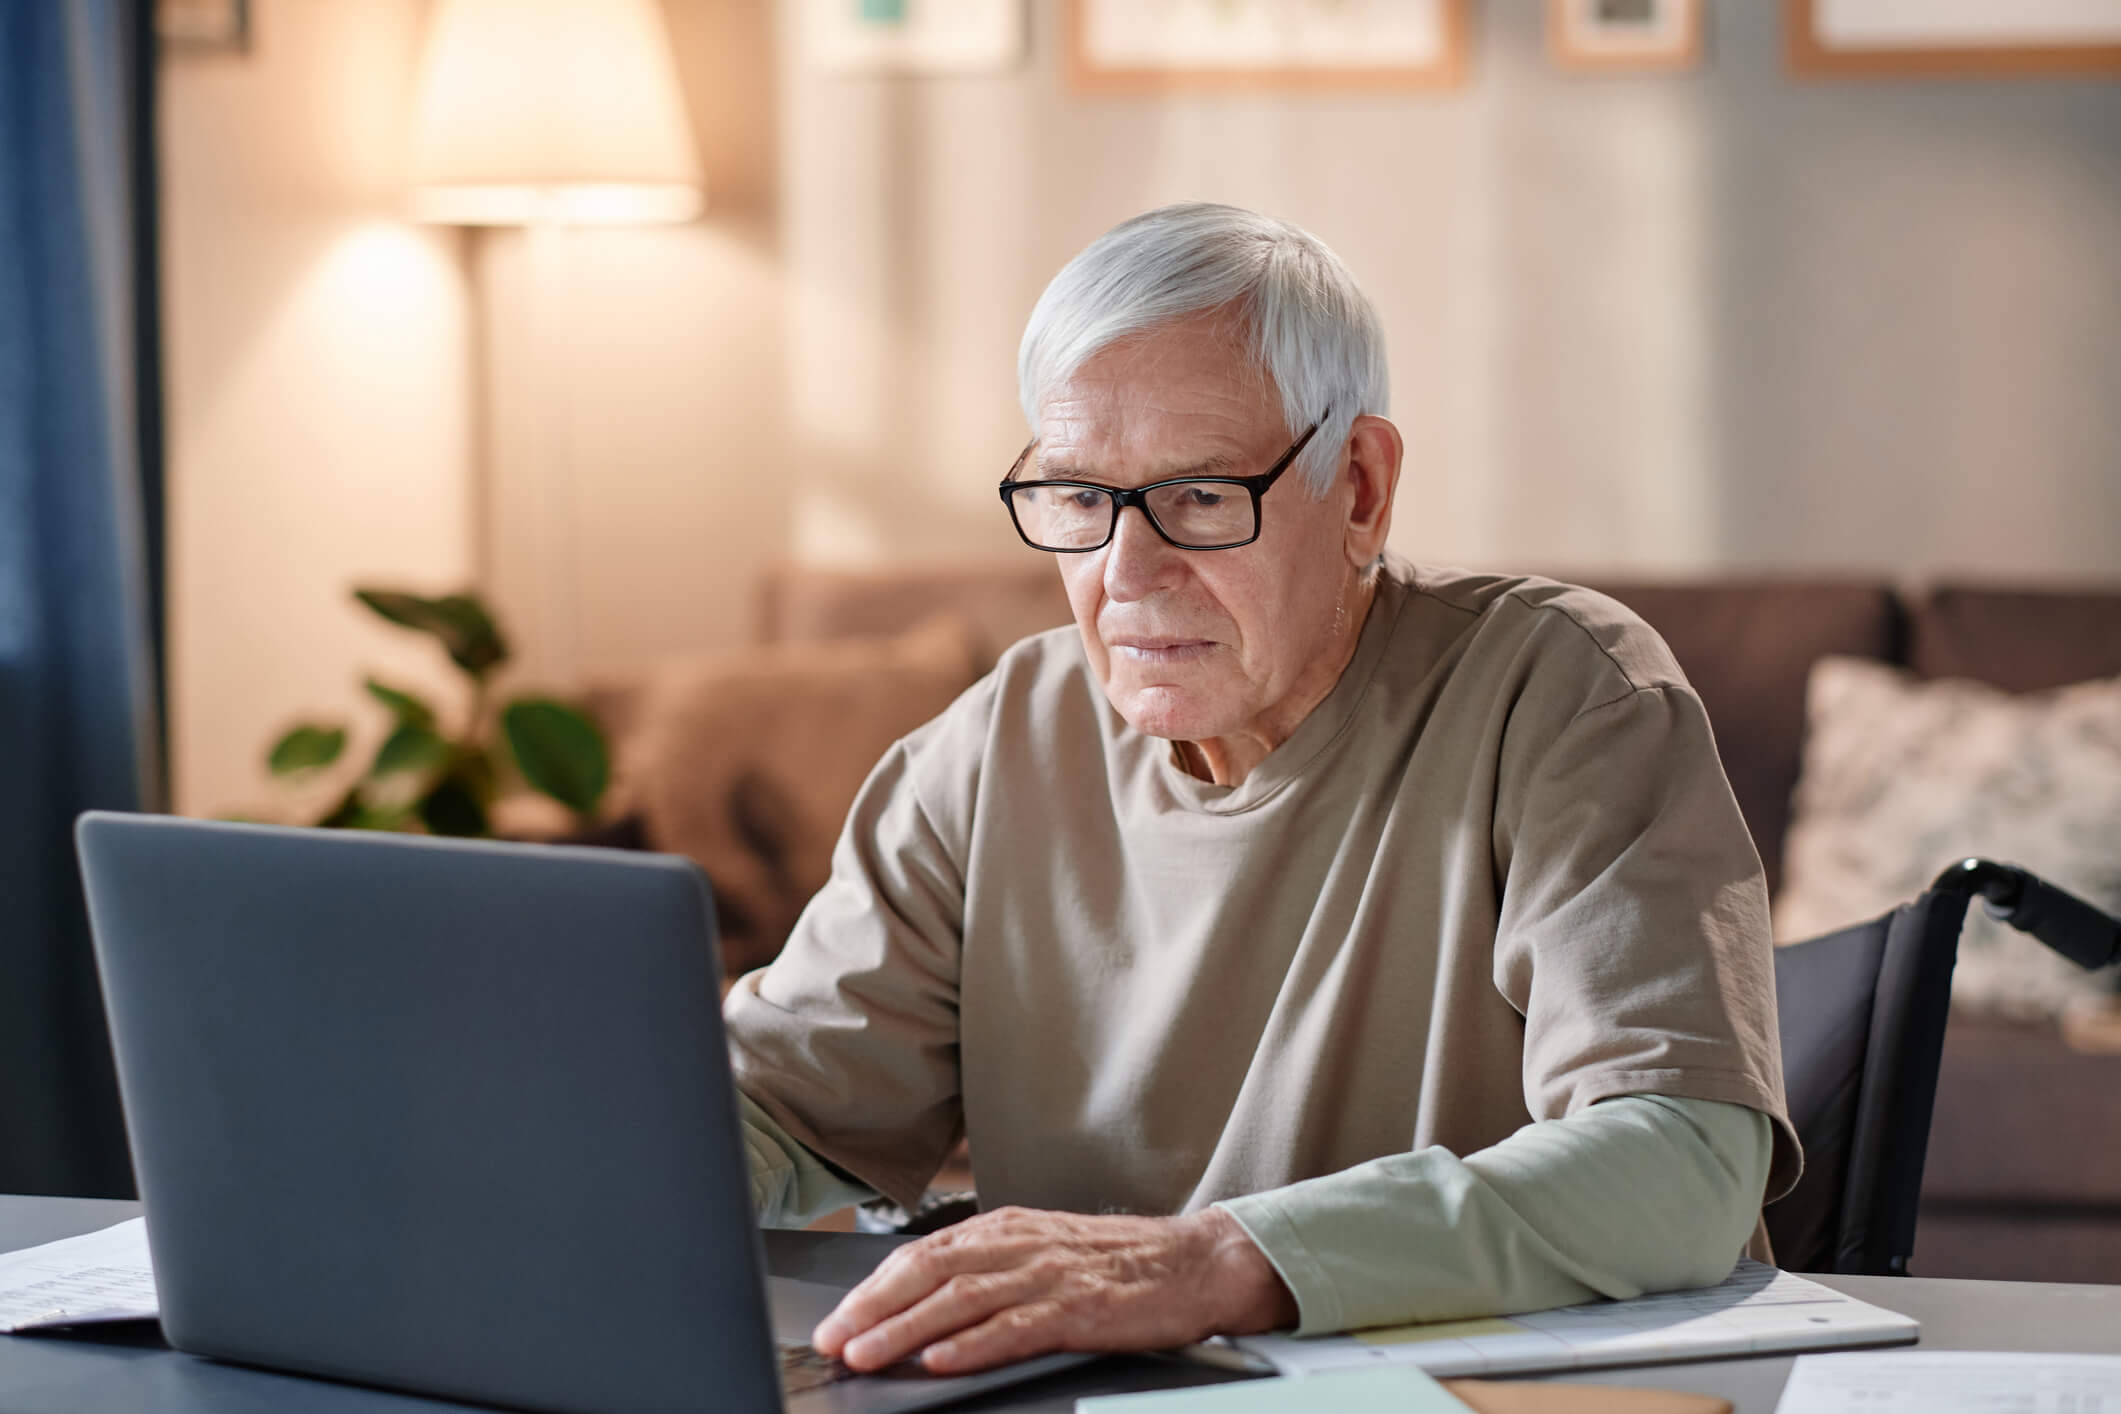 An older man in a wheelchair is in front of a laptop screen; he has a worried expression.